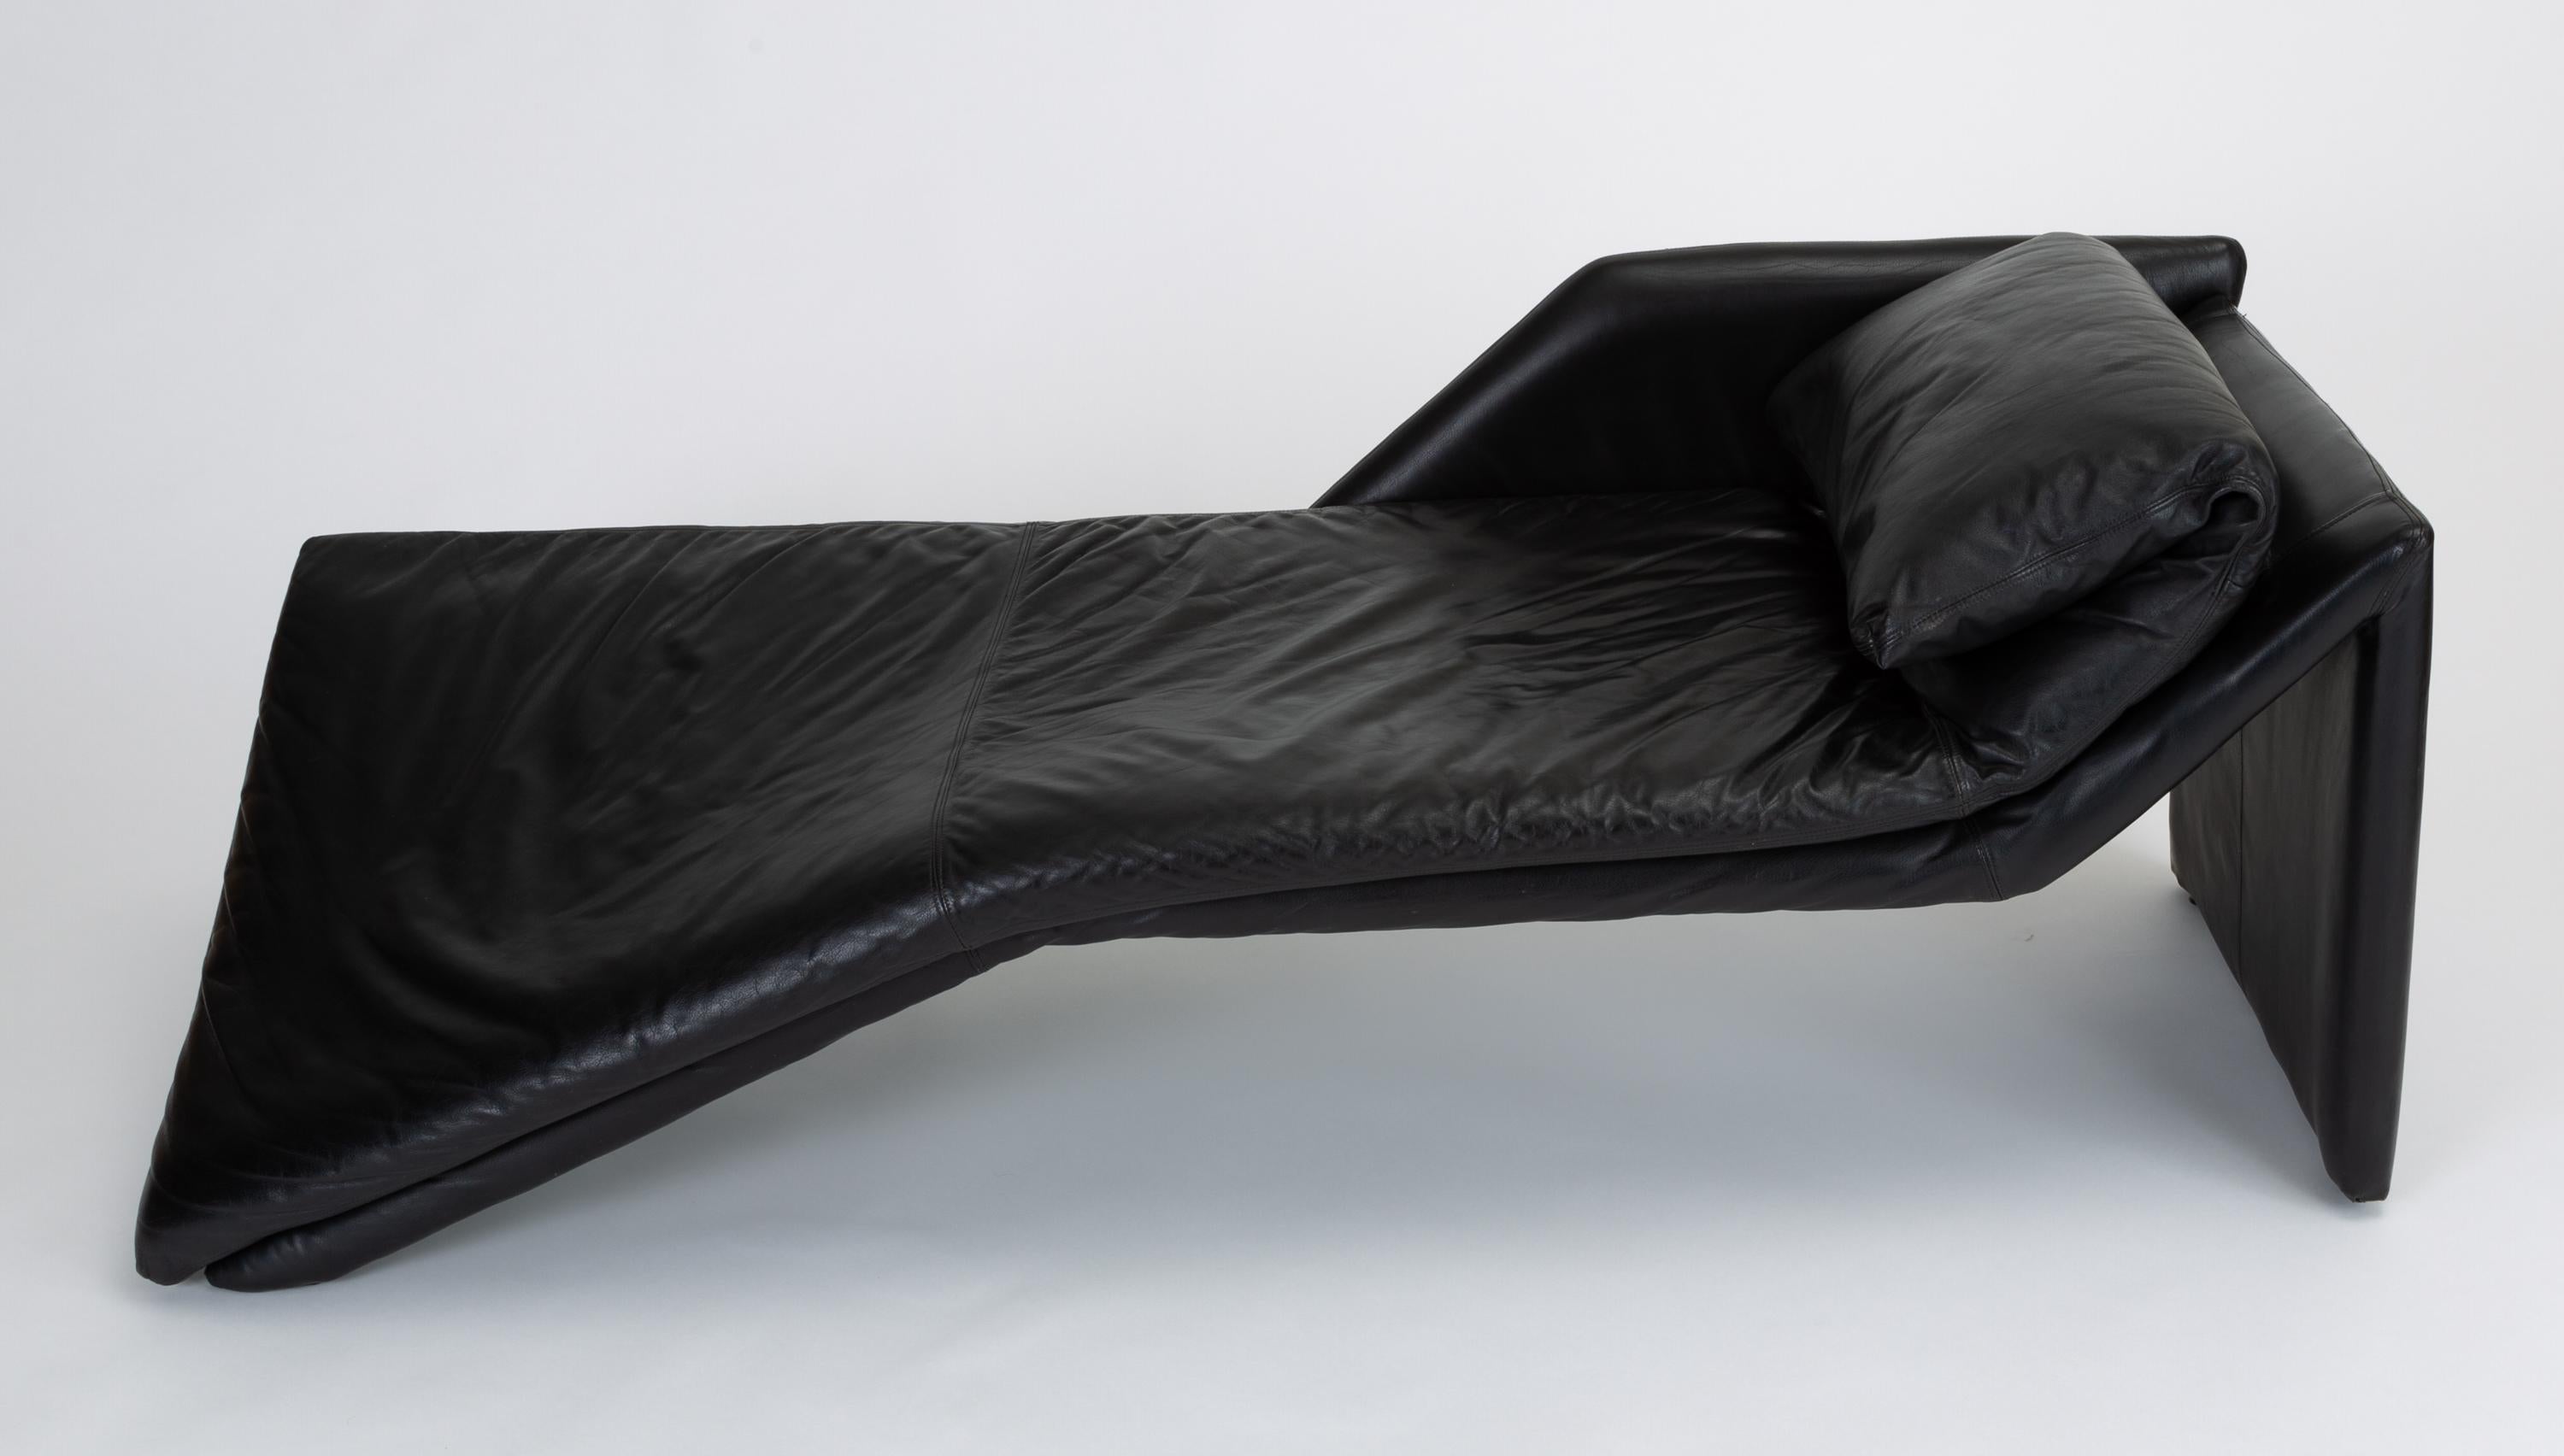 A stylish 1980s black leather chaise lounge by High Point, NC furniture company Preview is styled after the “Experience Chaise” by Luigi Sormani, though carries several small deviations from that design. The piece’s distinguishing characteristic is